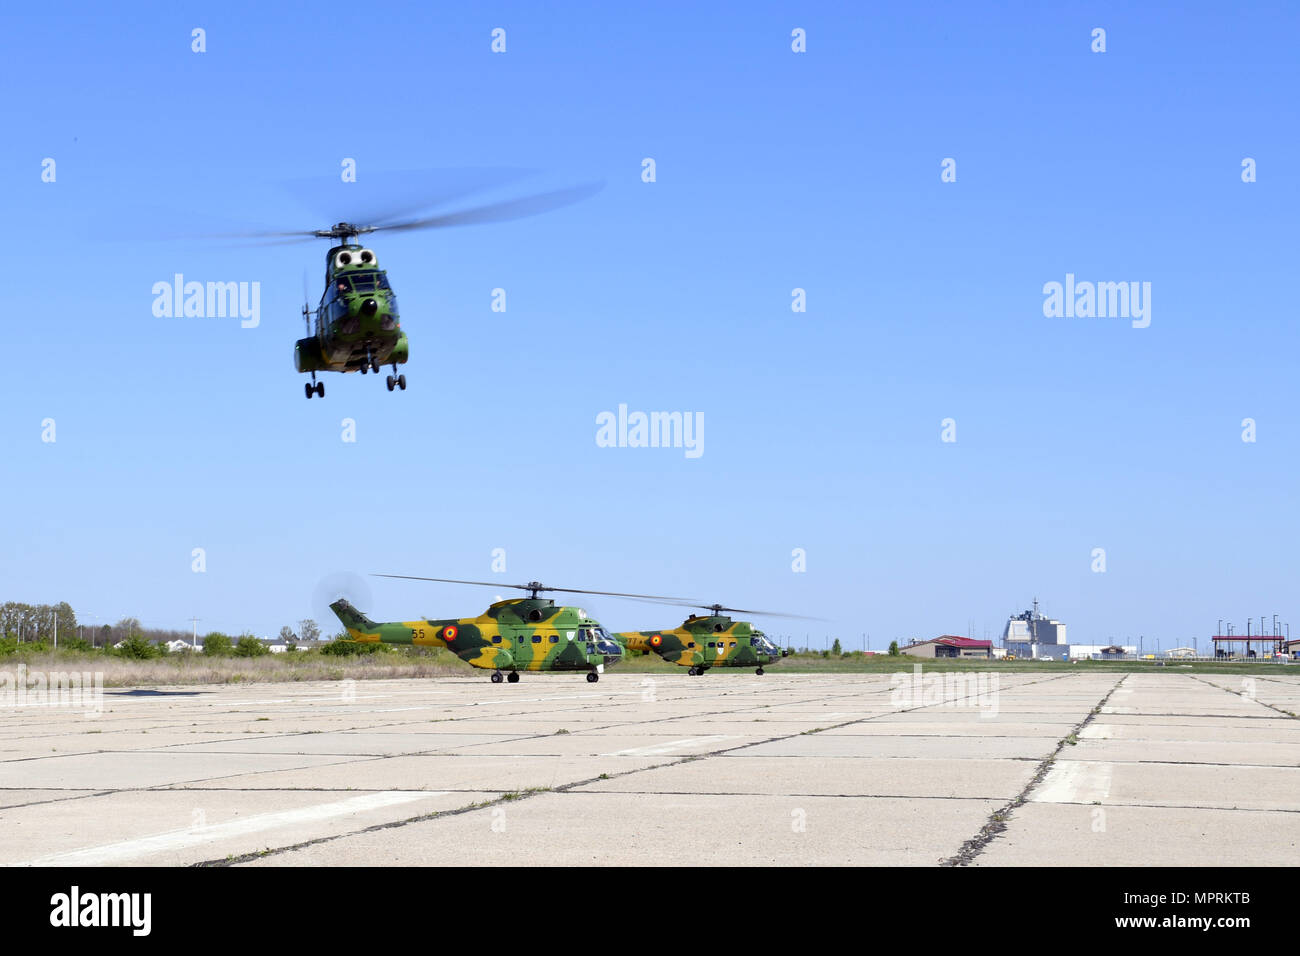 170410-N-ZN259-313 NAVAL SUPPORT FACILITY DEVESELU, Romania (April 11, 2017) Three IAR-330 Puma medium transport helipcopters take off from Naval Support Facility Deveselu carrying Commander, U.S. Air Forces in Europe and U.S. Air Forces in Africa, Commander, Allied Air Command, and Director, Joint Air Power Competency Centre, Kalkar, Germany Gen. Tod D. Wolters, Lt. Gen. Laurian Anastasof, Chief of Romanian Air Force, Brig. Gen. Dieter E. Bareihs, U.S. Air Force Director of Plans, and staff. NSF Deveselu plays a key role in ballistic missile defense in Eastern Europe. The installation's opera Stock Photo